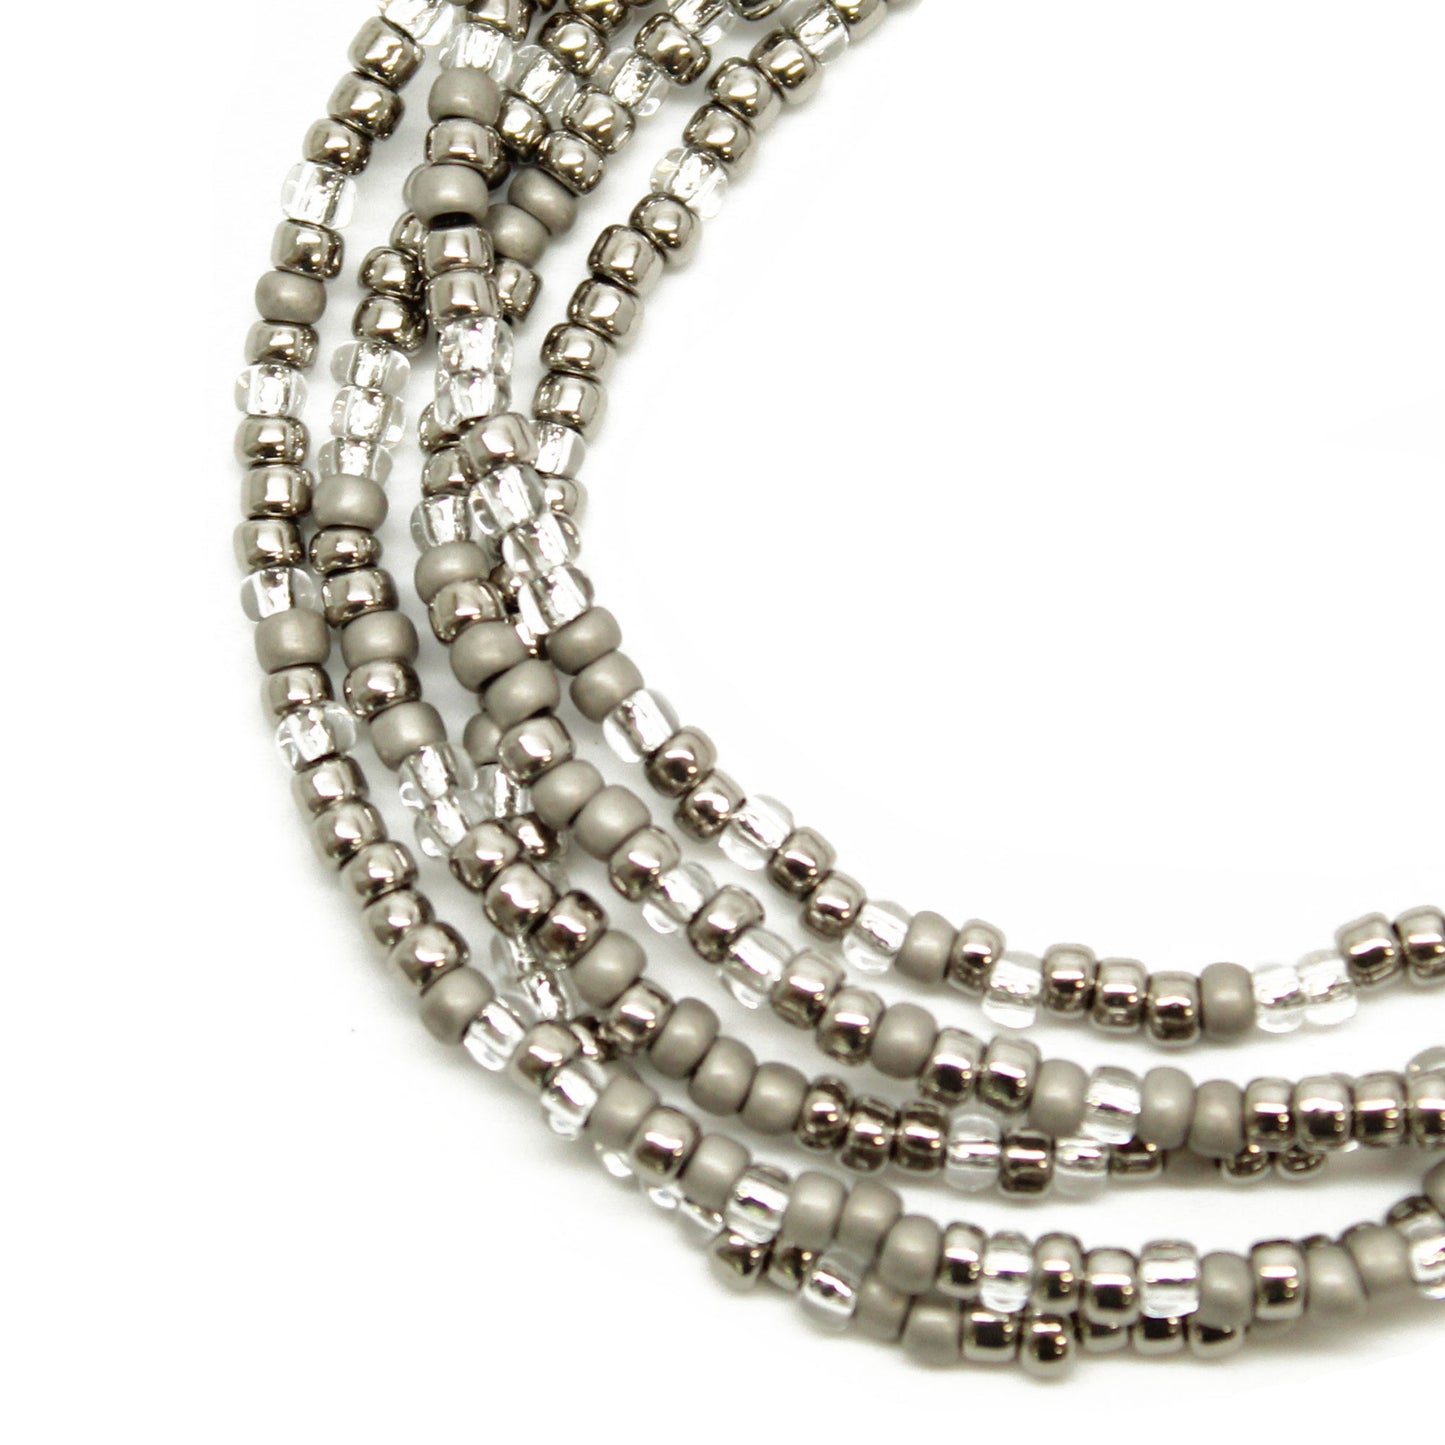 Silver and Grey Seed Bead Necklace,